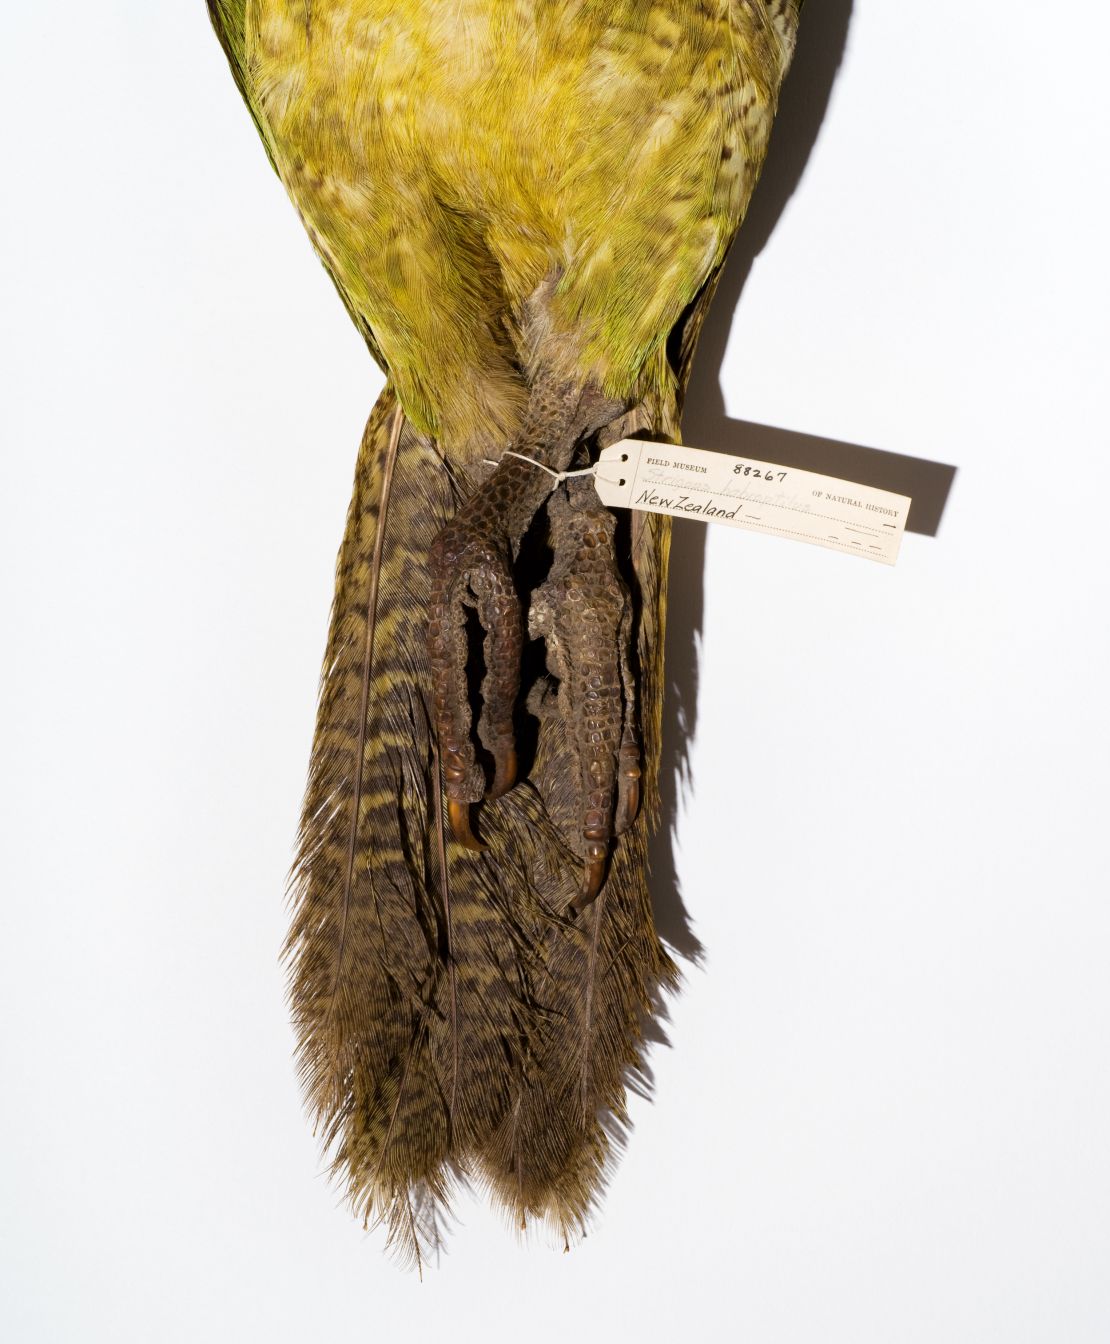 New Zealand kākāpos (specimen from the Field Museum's collection) have been conserved by a government-supported relocation and recovery program, according to "Extinction." 